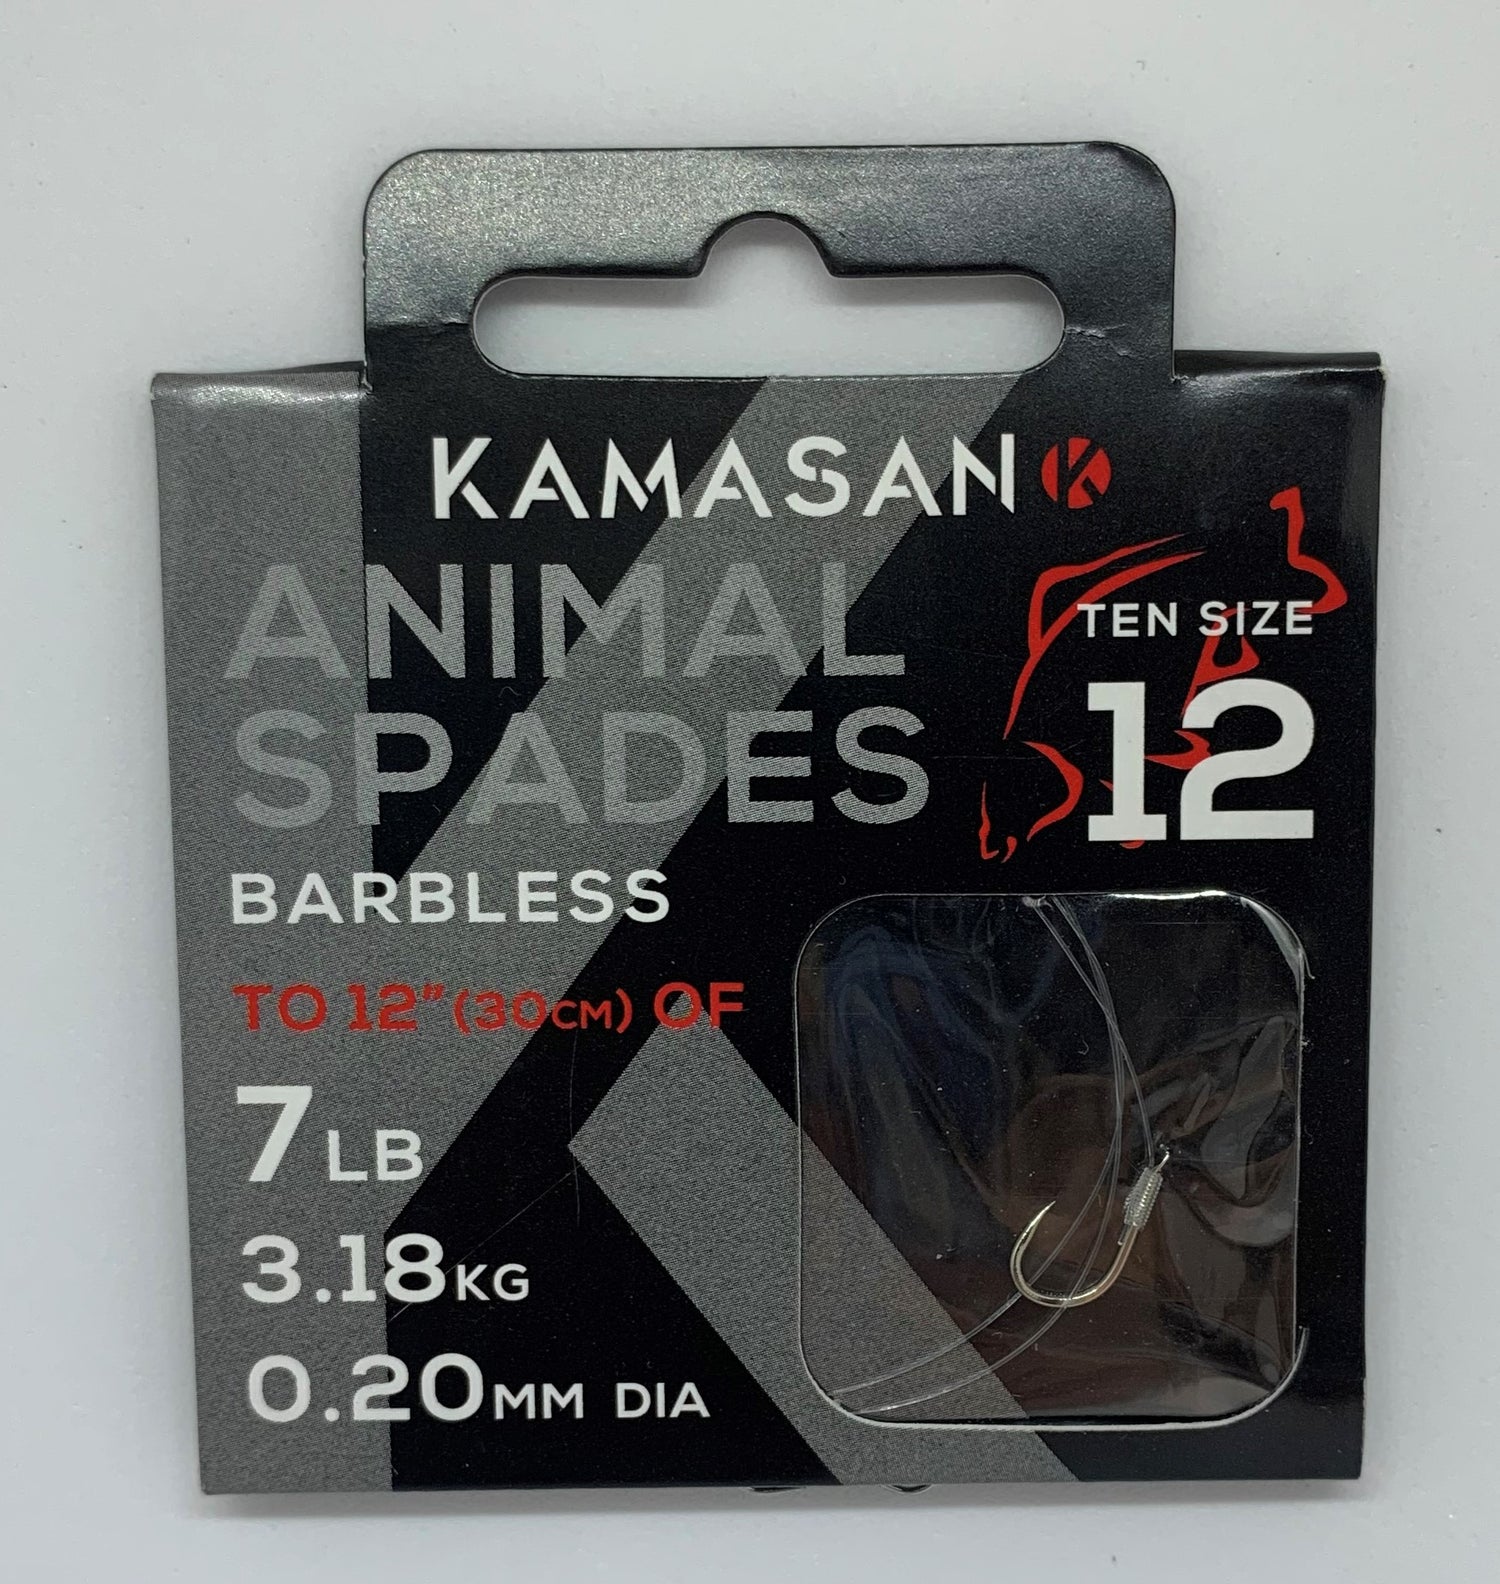 Kamasan Animal X-Strong Size 12 Hooks to Nylon. Ideal For Float Or Feeder Fishing.